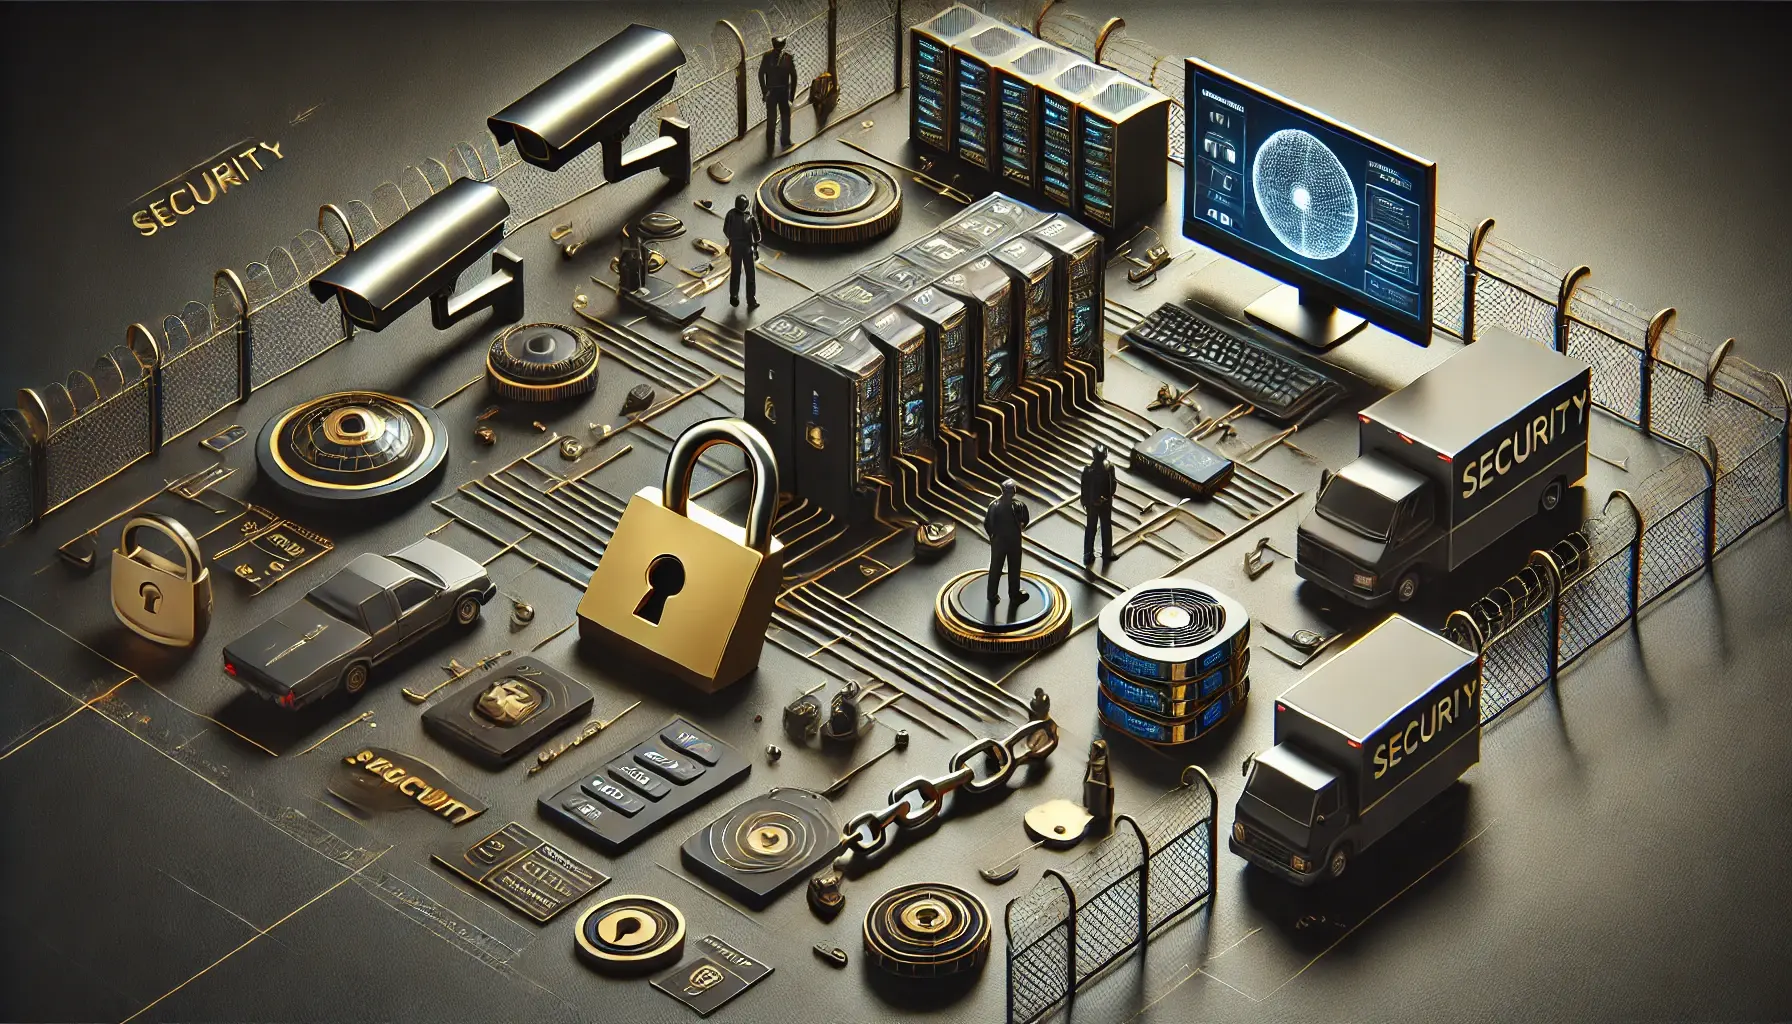 A photorealistic image symbolizing multi-layered security strategies, featuring a black and gold color scheme.  